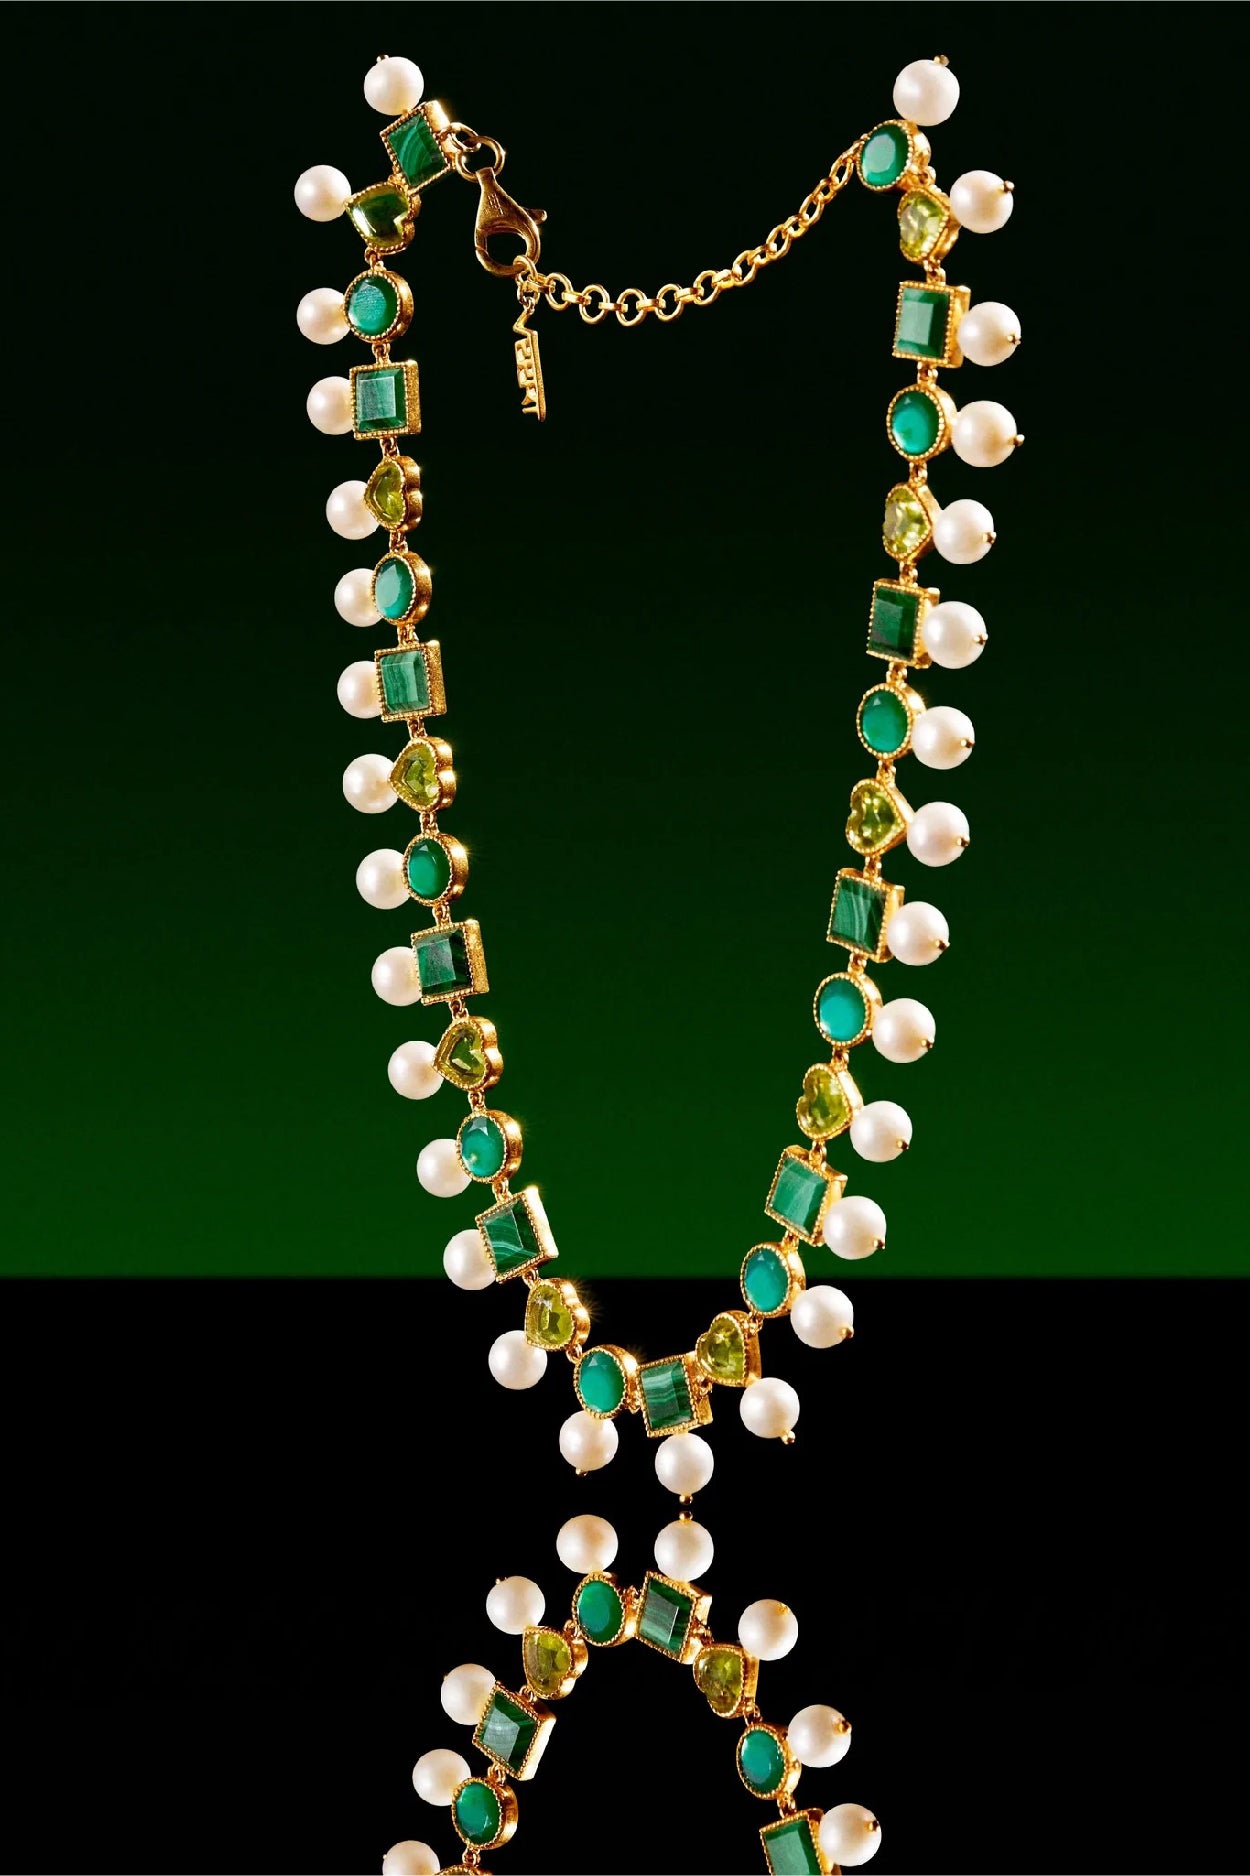 The Green Pearl Shape Necklace